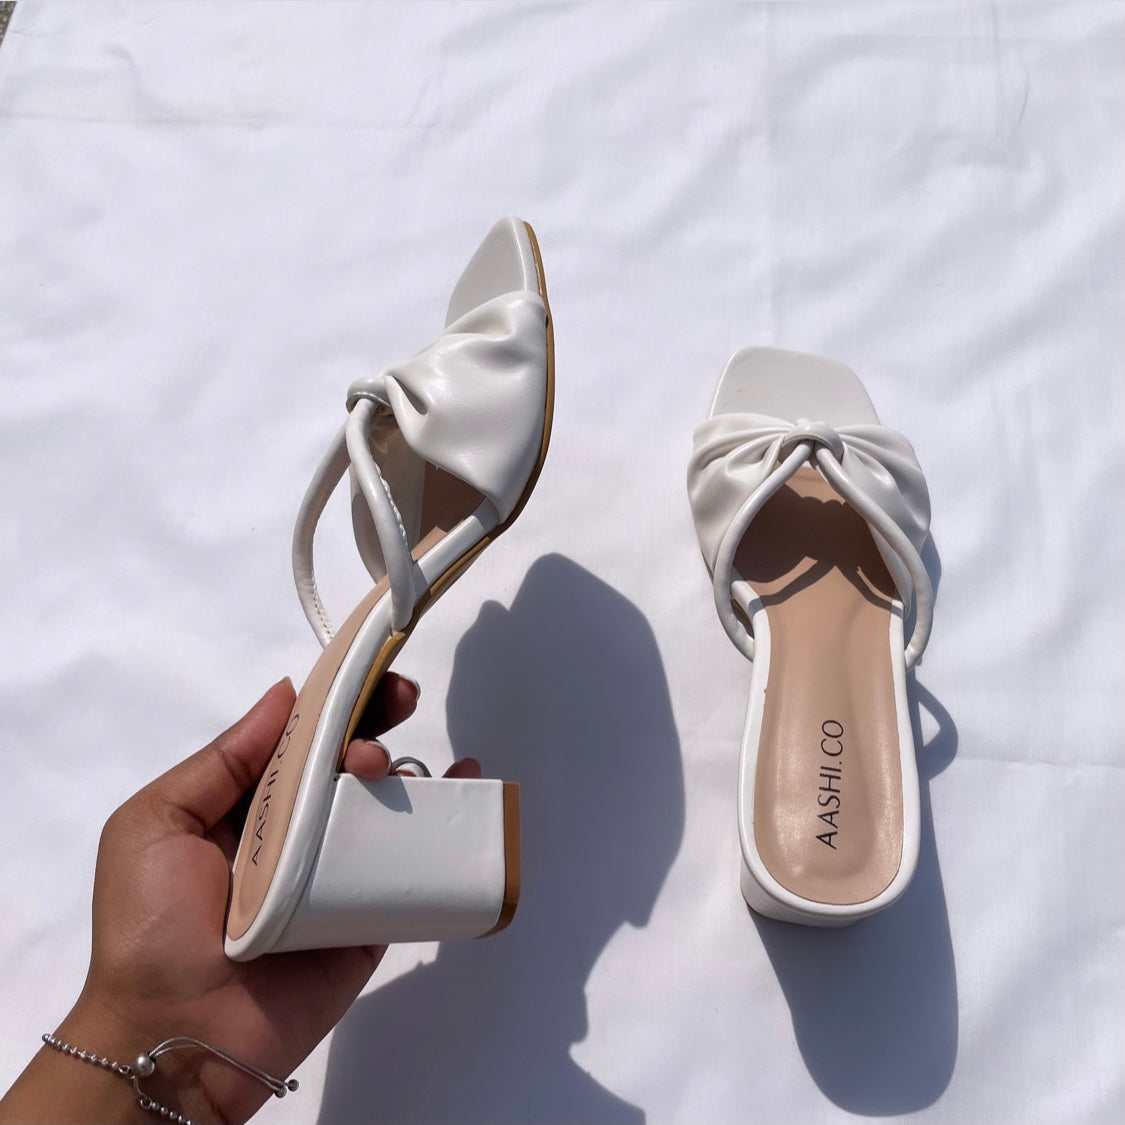 Bow Tie Mules (White)